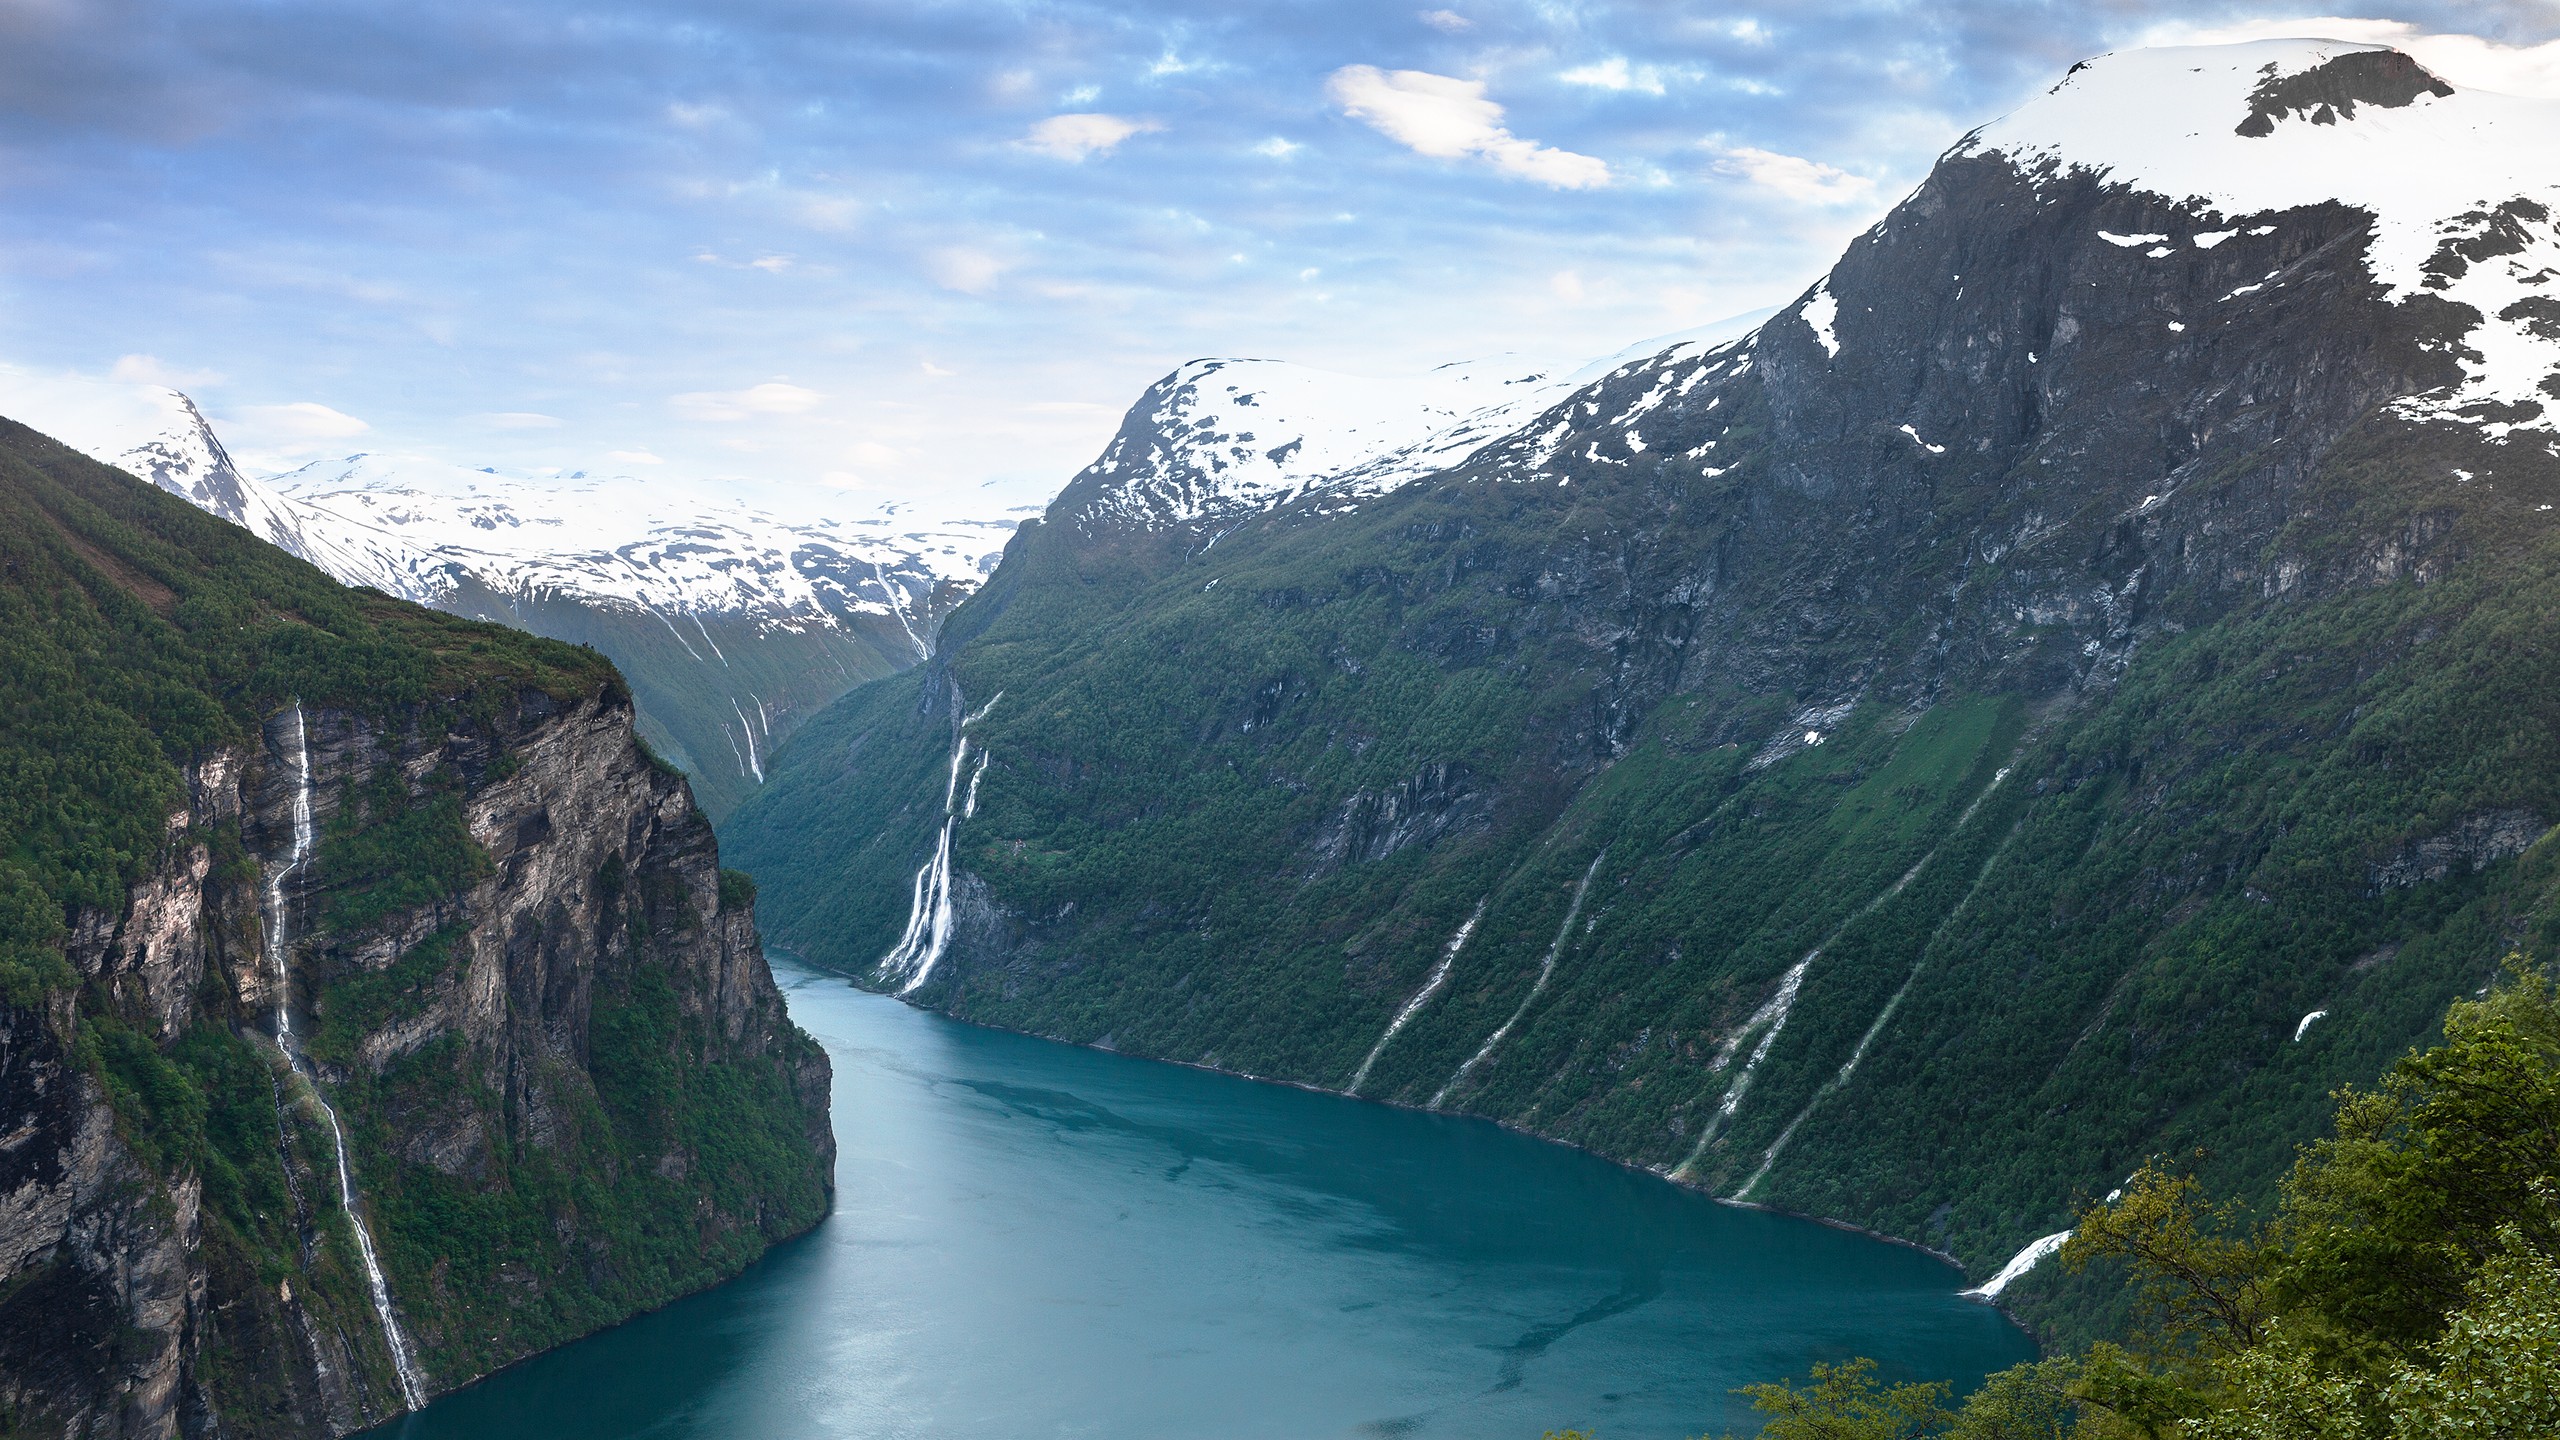 General 2560x1440 river ice snow nature canyon landscape mountains fjord Norway Geirangerfjord Geiranger water